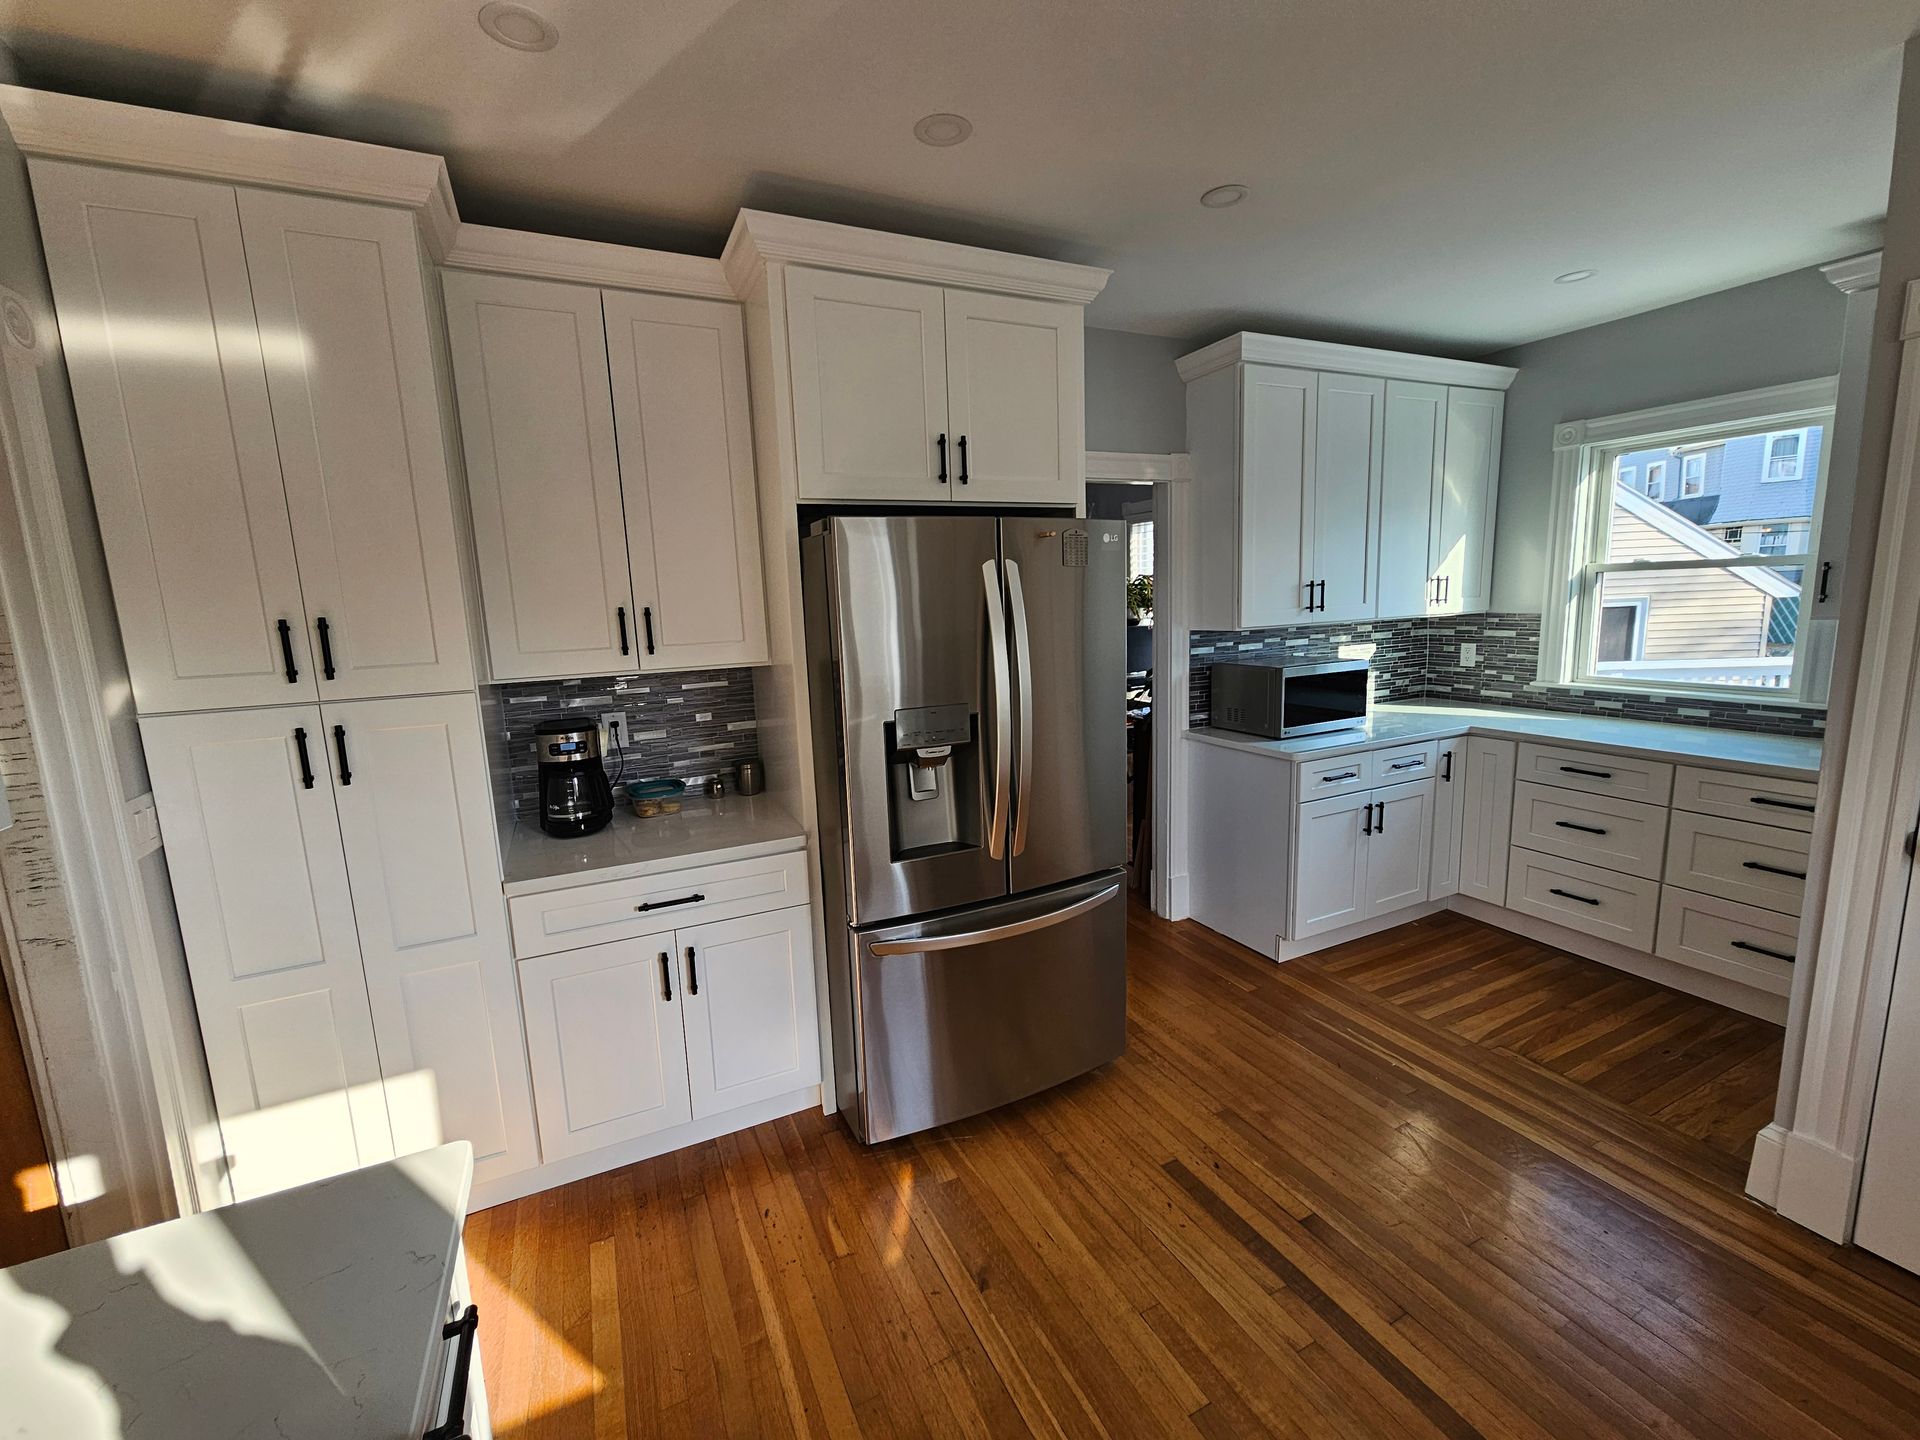 New kitchen remodeling job done by A-Z Finish Carpentry. Job location is Winthrop, MA